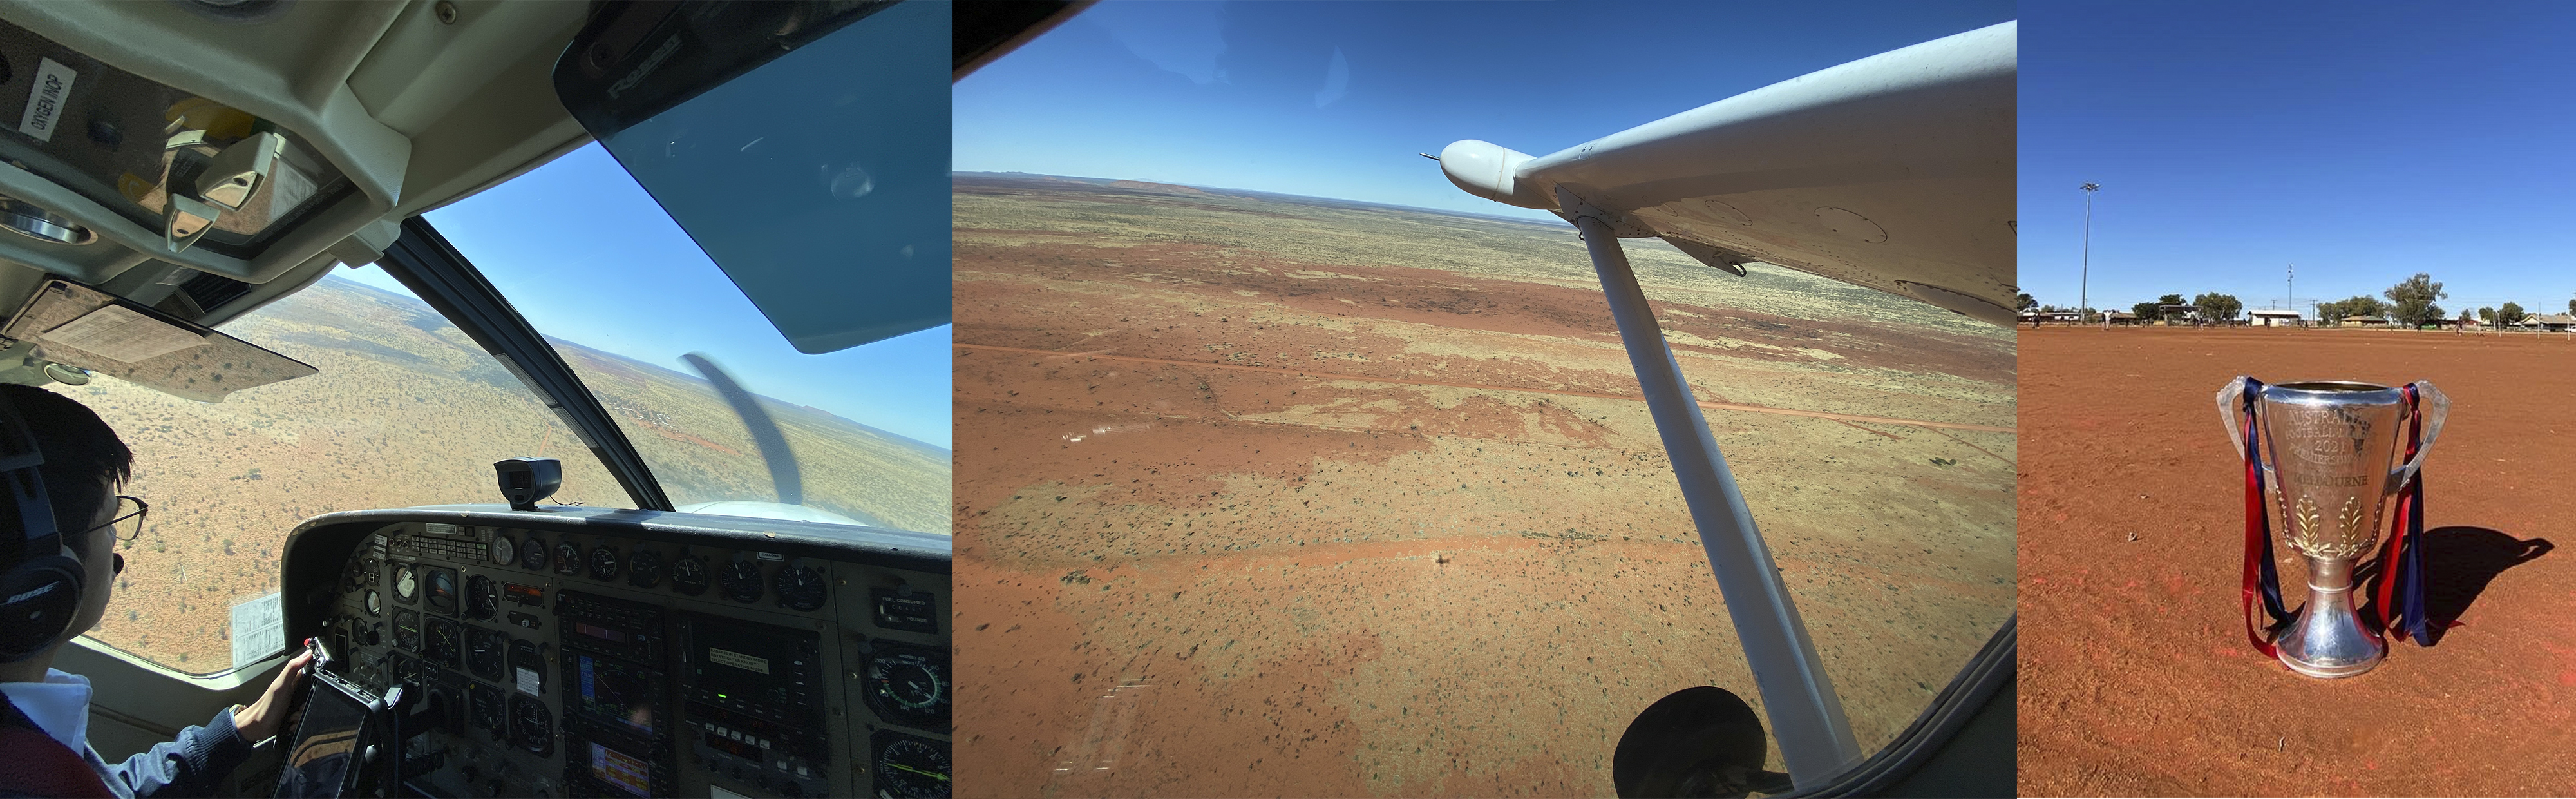 images taken from airplane when coming in to land at Yuendumu. aerial images, blue sky, red dust